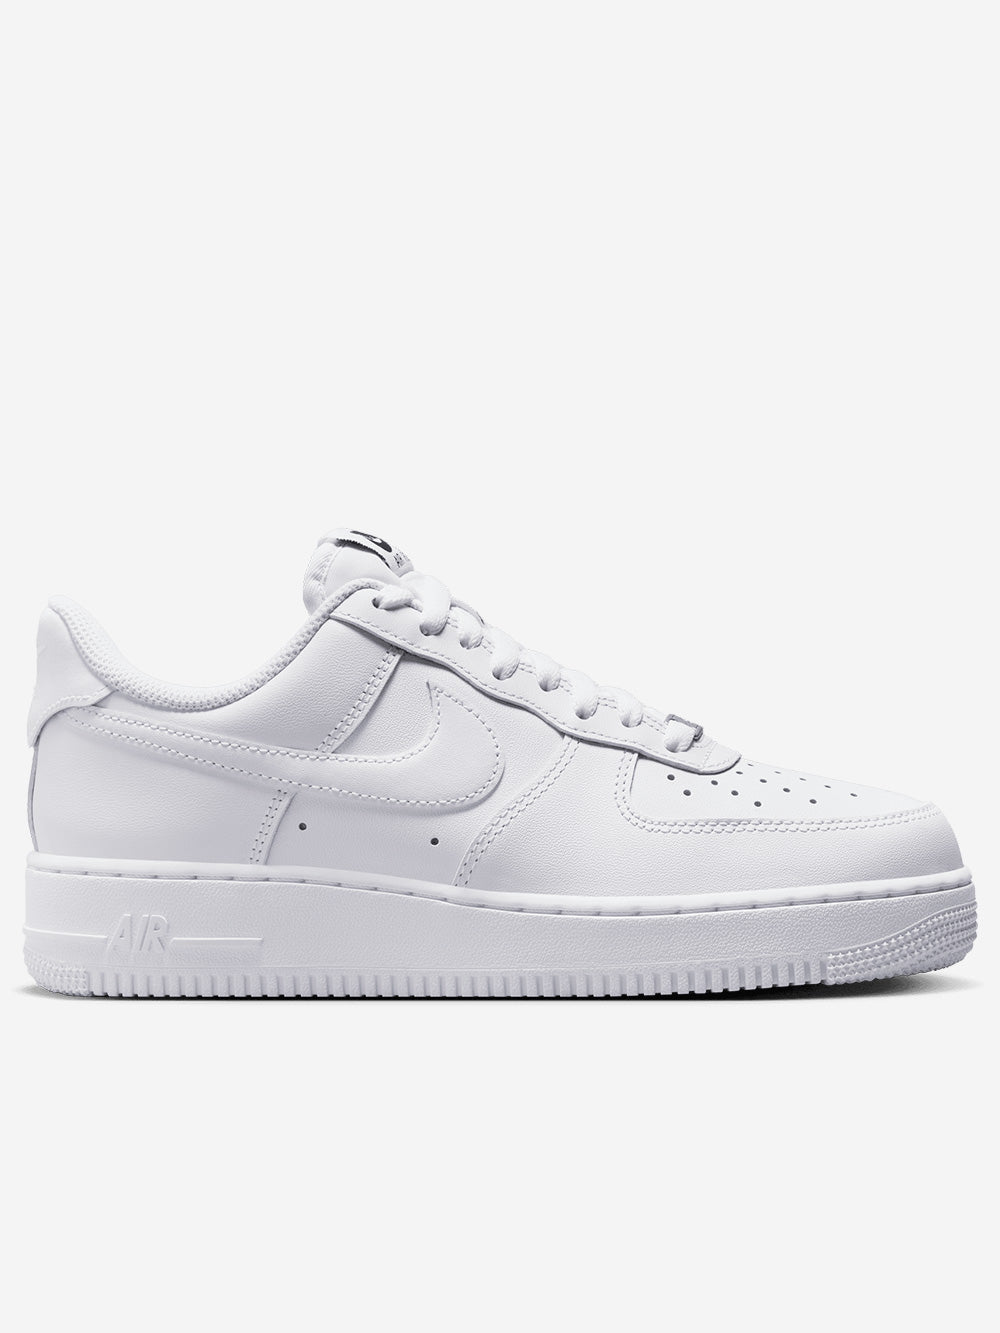 NIKE Air Force 1 '07 FlyEase Sneakers Bianco Urbanstaroma